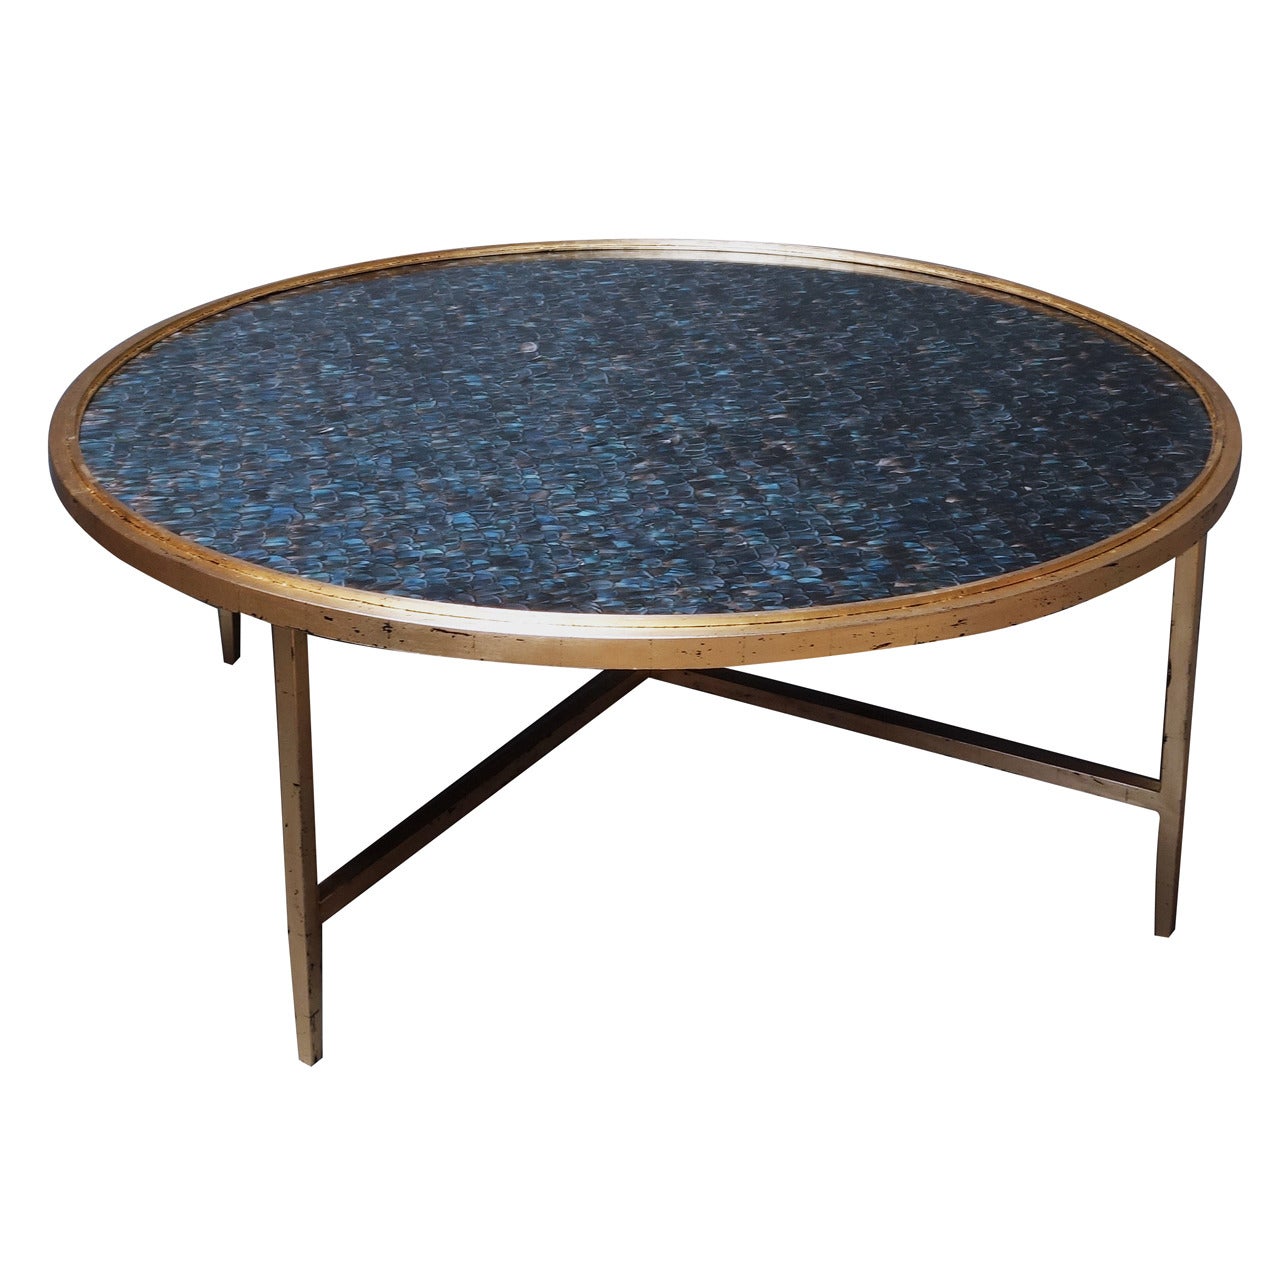 Daedalus Table For Sale